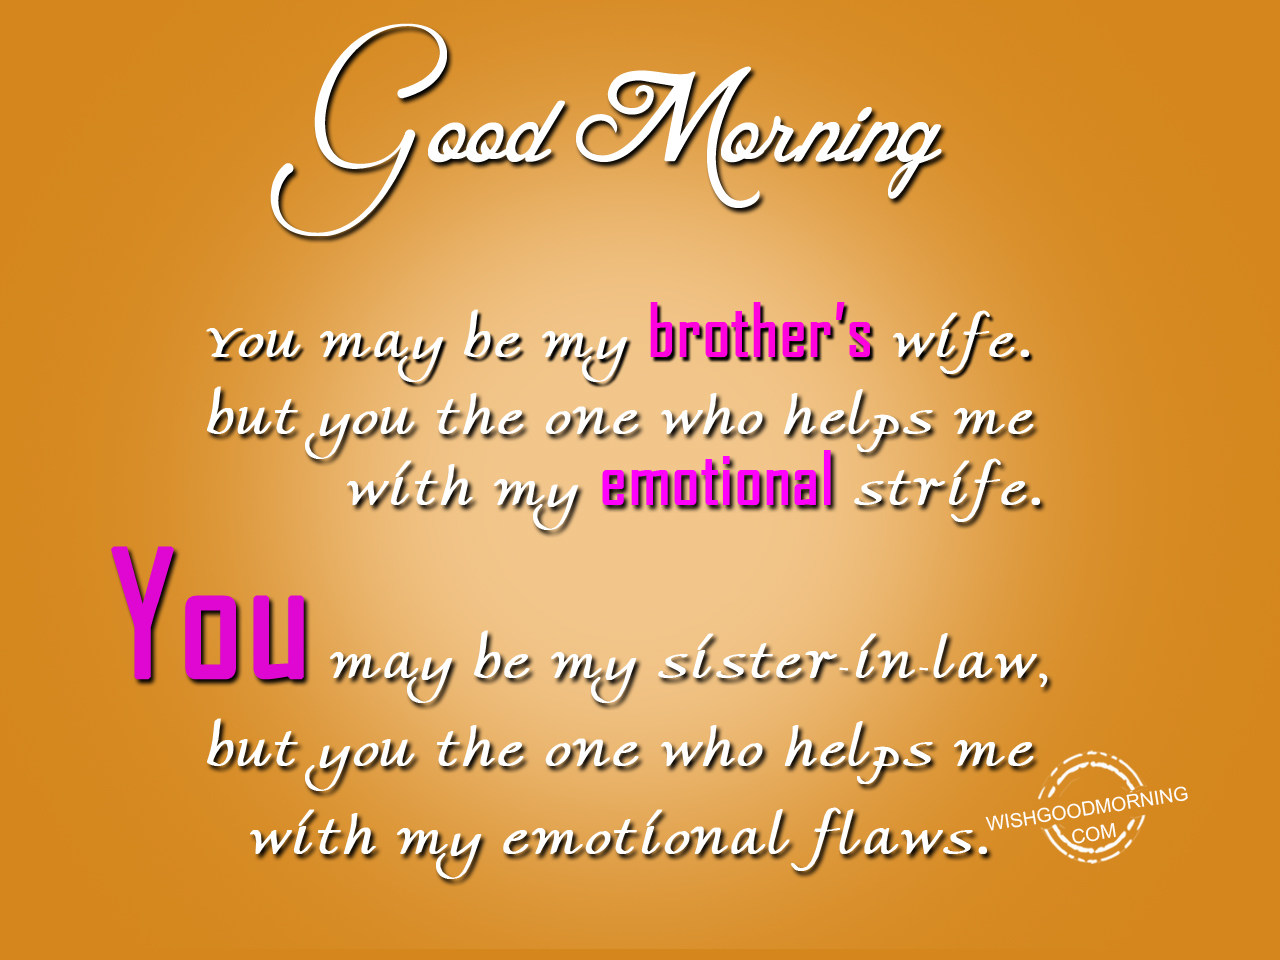 Good Morning Wishes For Sister-in-law - Good Morning Pictures ...